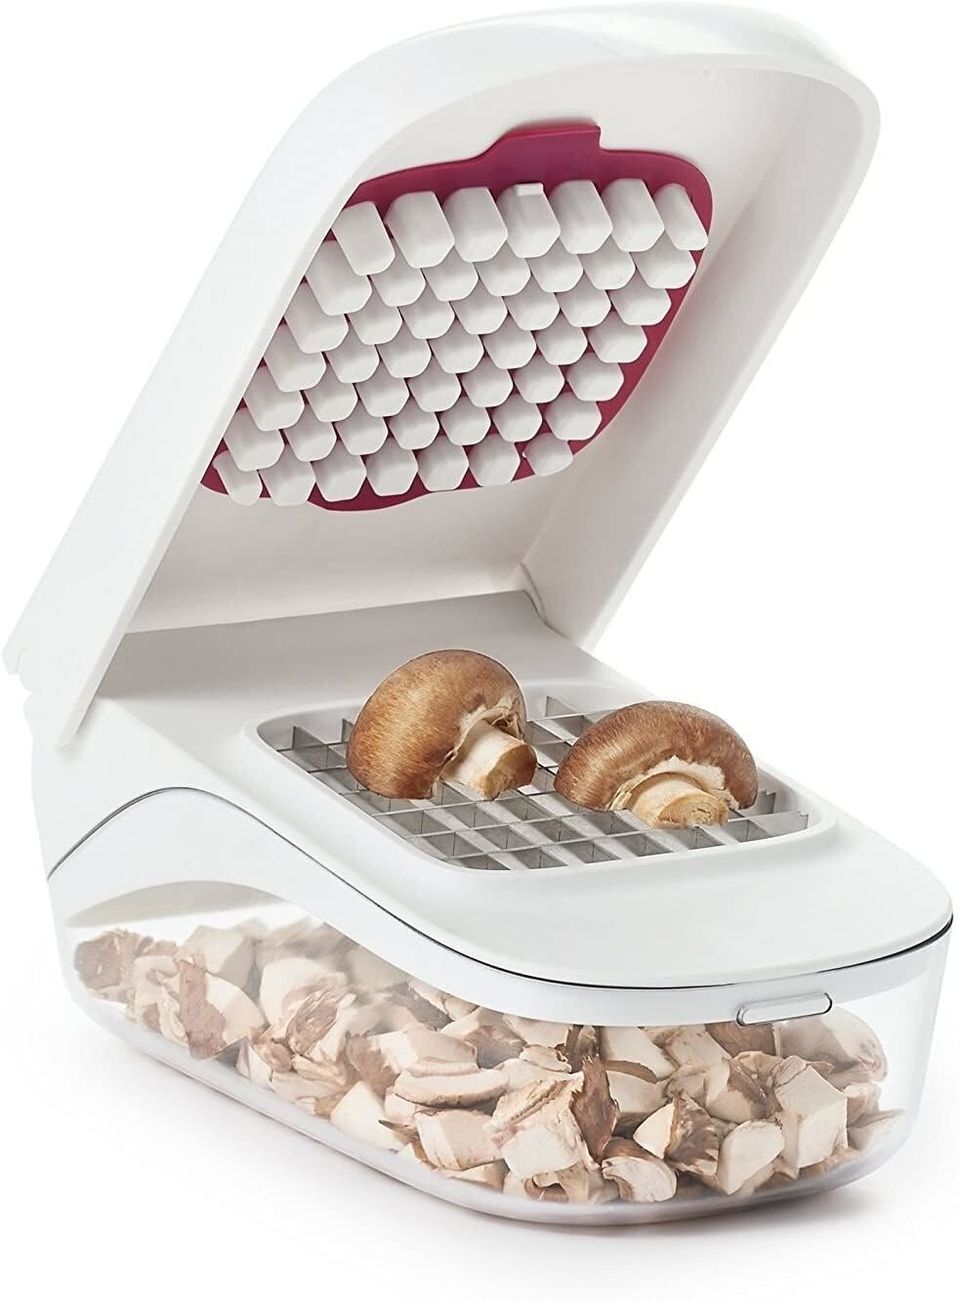 A kitchen gadget you can use to dice onions in a flash